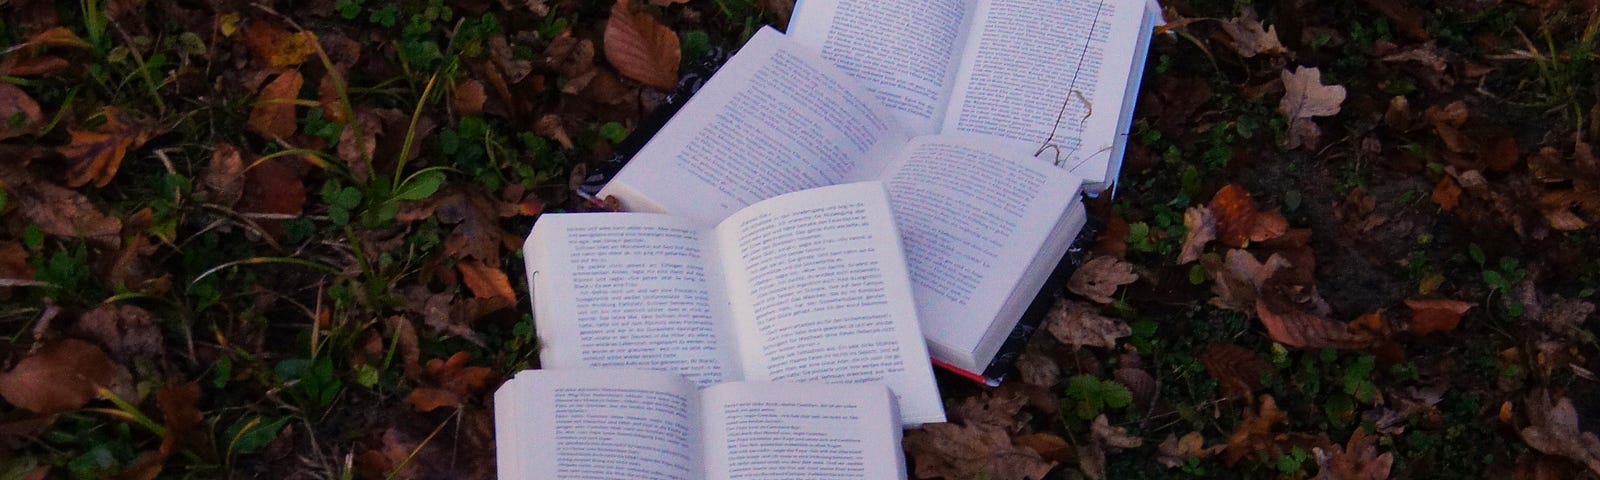 A line of open books laid out in a field, like a road.